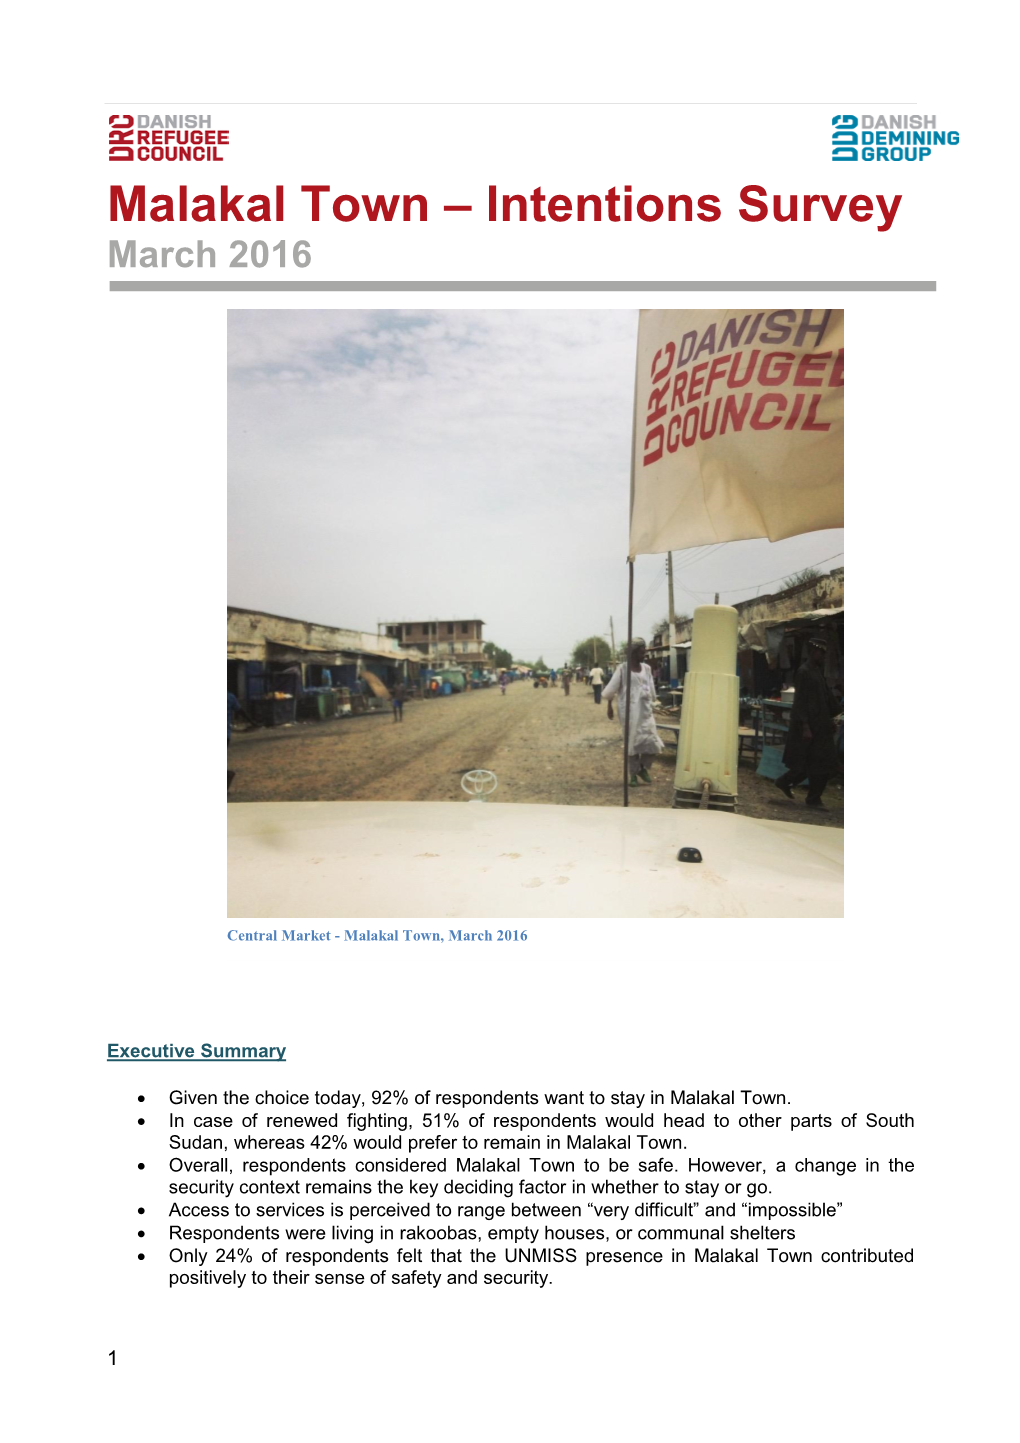 Malakal Town – Intentions Survey March 2016